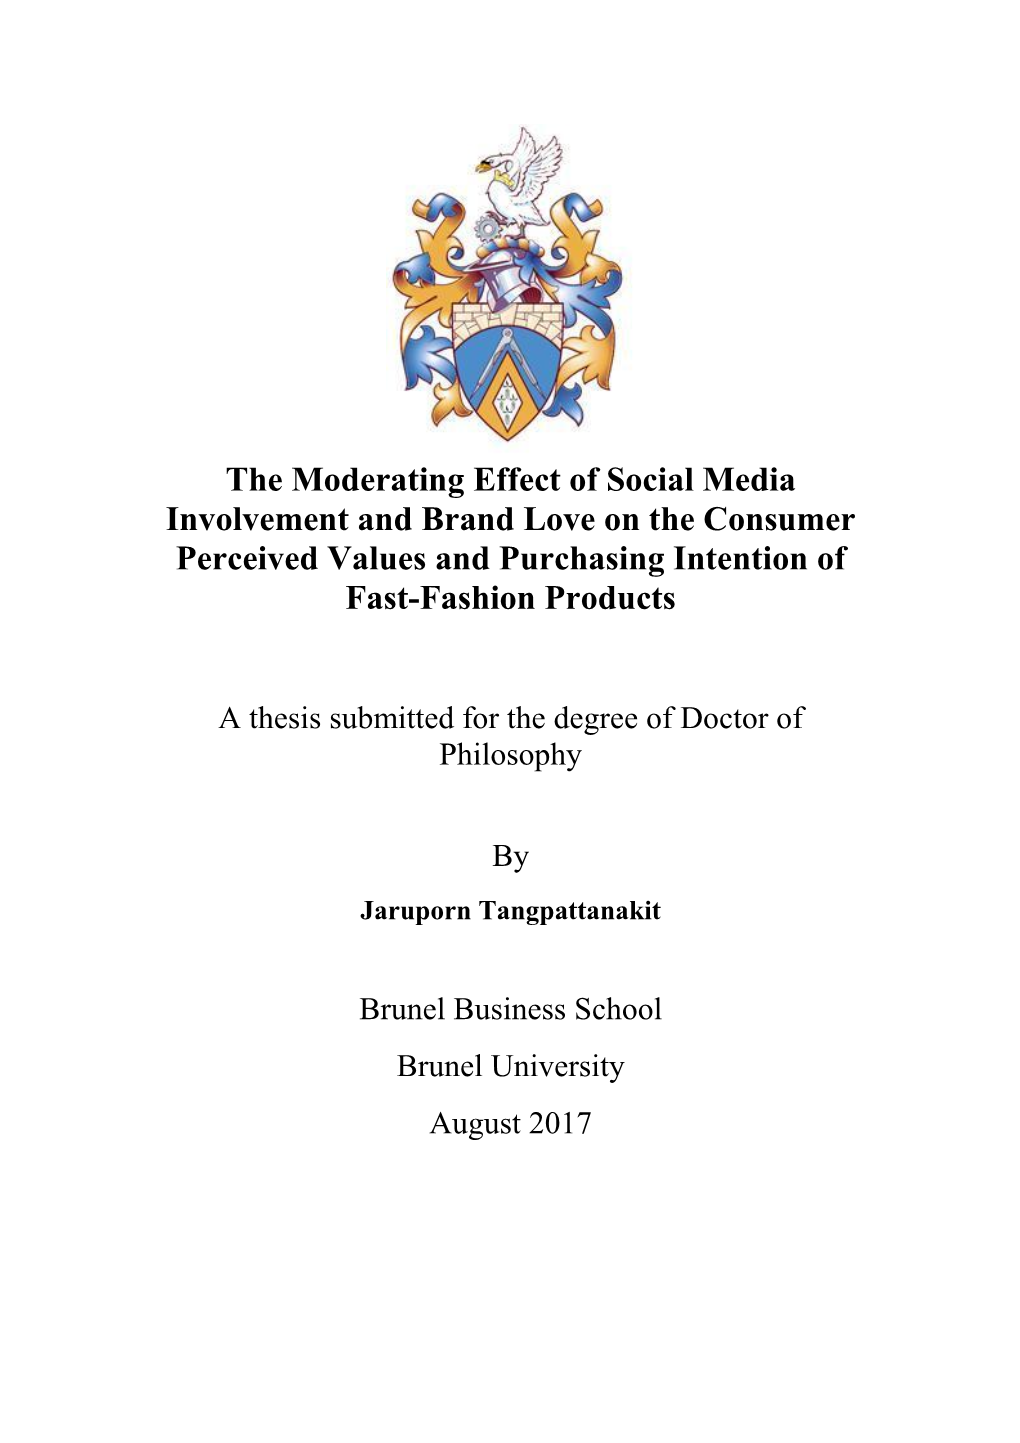 The Moderating Effect of Social Media Involvement and Brand Love on the Consumer Perceived Values and Purchasing Intention of Fast-Fashion Products